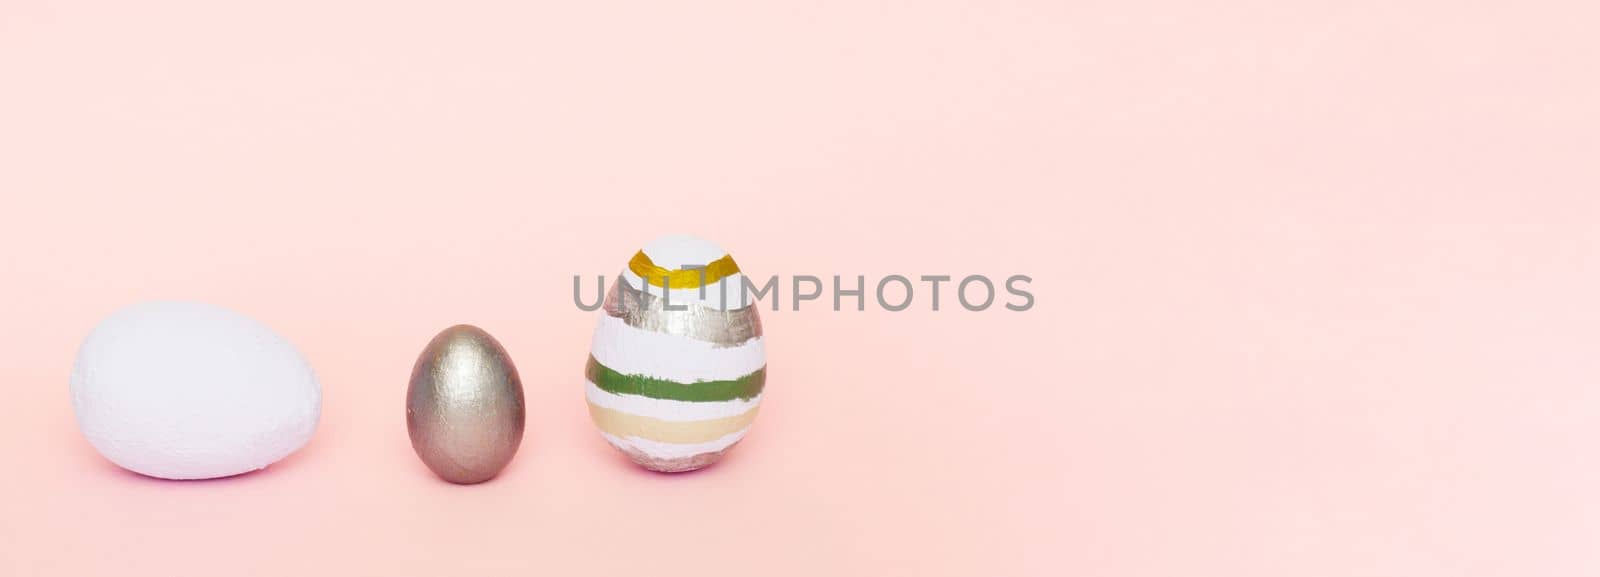 Three different handmade eggs on a pink background. by gelog67